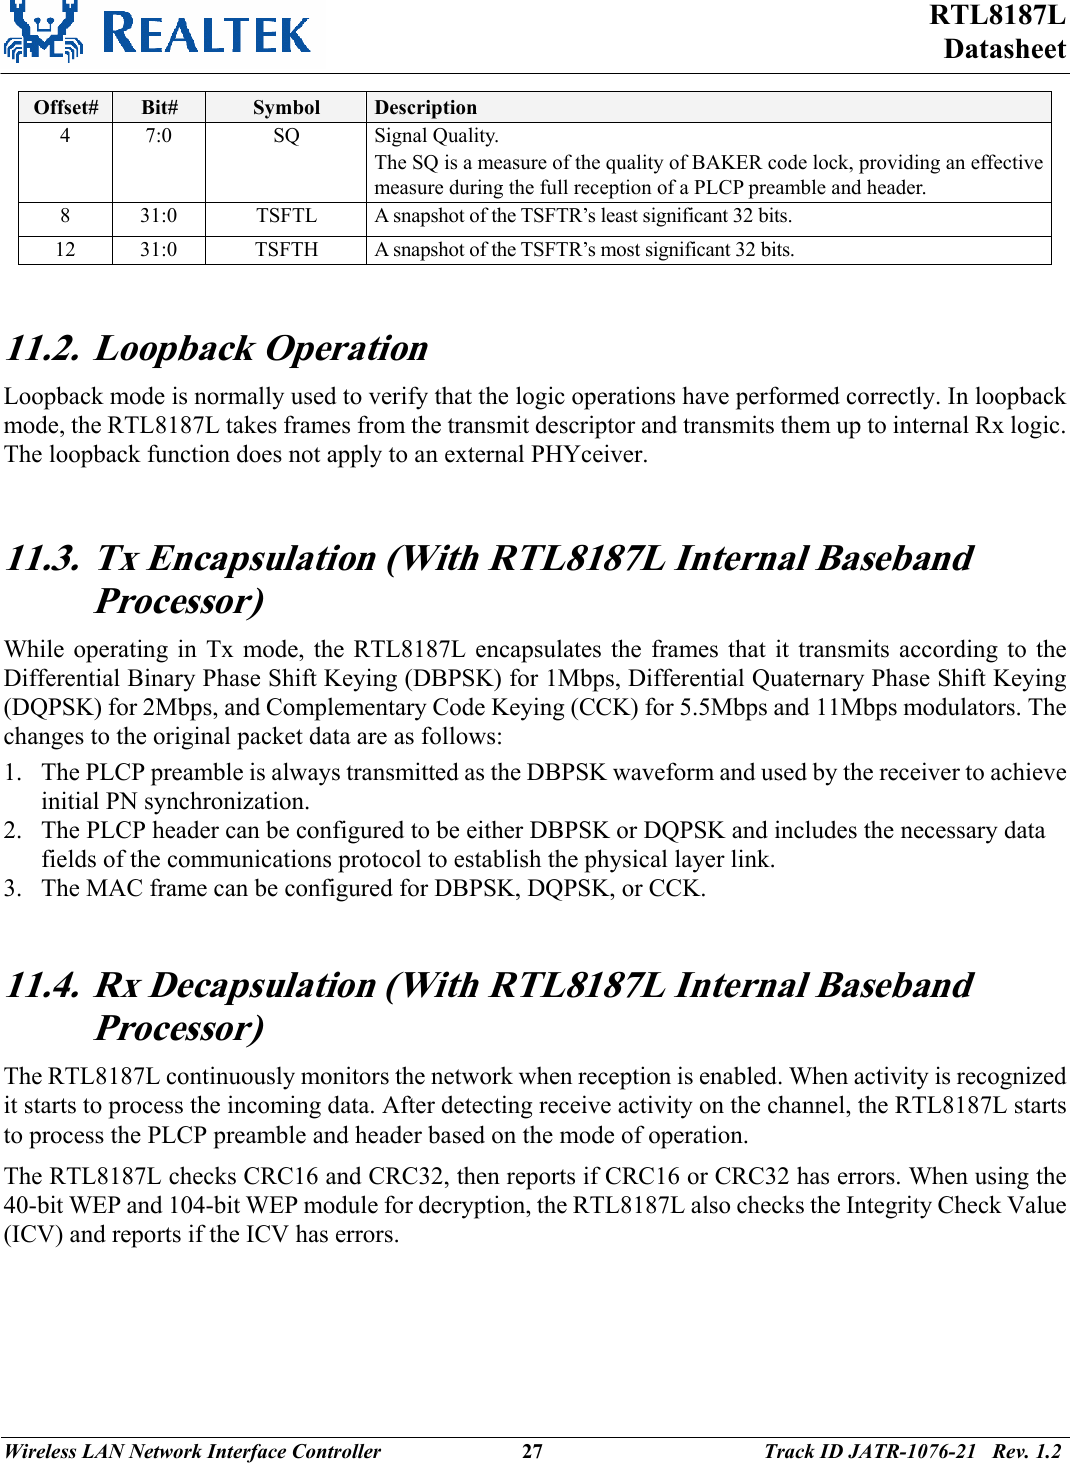 RTL8187L Datasheet Wireless LAN Network Interface Controller                           27                                          Track ID JATR-1076-21   Rev. 1.2  Offset#  Bit#  Symbol  Description 4 7:0  SQ Signal Quality. The SQ is a measure of the quality of BAKER code lock, providing an effective measure during the full reception of a PLCP preamble and header. 8  31:0  TSFTL  A snapshot of the TSFTR’s least significant 32 bits. 12  31:0  TSFTH  A snapshot of the TSFTR’s most significant 32 bits.   11.2. Loopback Operation Loopback mode is normally used to verify that the logic operations have performed correctly. In loopback mode, the RTL8187L takes frames from the transmit descriptor and transmits them up to internal Rx logic. The loopback function does not apply to an external PHYceiver.  11.3. Tx Encapsulation (With RTL8187L Internal Baseband Processor) While operating in Tx mode, the RTL8187L encapsulates the frames that it transmits according to the Differential Binary Phase Shift Keying (DBPSK) for 1Mbps, Differential Quaternary Phase Shift Keying (DQPSK) for 2Mbps, and Complementary Code Keying (CCK) for 5.5Mbps and 11Mbps modulators. The changes to the original packet data are as follows: 1. The PLCP preamble is always transmitted as the DBPSK waveform and used by the receiver to achieve initial PN synchronization. 2. The PLCP header can be configured to be either DBPSK or DQPSK and includes the necessary data fields of the communications protocol to establish the physical layer link. 3. The MAC frame can be configured for DBPSK, DQPSK, or CCK.  11.4. Rx Decapsulation (With RTL8187L Internal Baseband Processor) The RTL8187L continuously monitors the network when reception is enabled. When activity is recognized it starts to process the incoming data. After detecting receive activity on the channel, the RTL8187L starts to process the PLCP preamble and header based on the mode of operation. The RTL8187L checks CRC16 and CRC32, then reports if CRC16 or CRC32 has errors. When using the 40-bit WEP and 104-bit WEP module for decryption, the RTL8187L also checks the Integrity Check Value (ICV) and reports if the ICV has errors.  